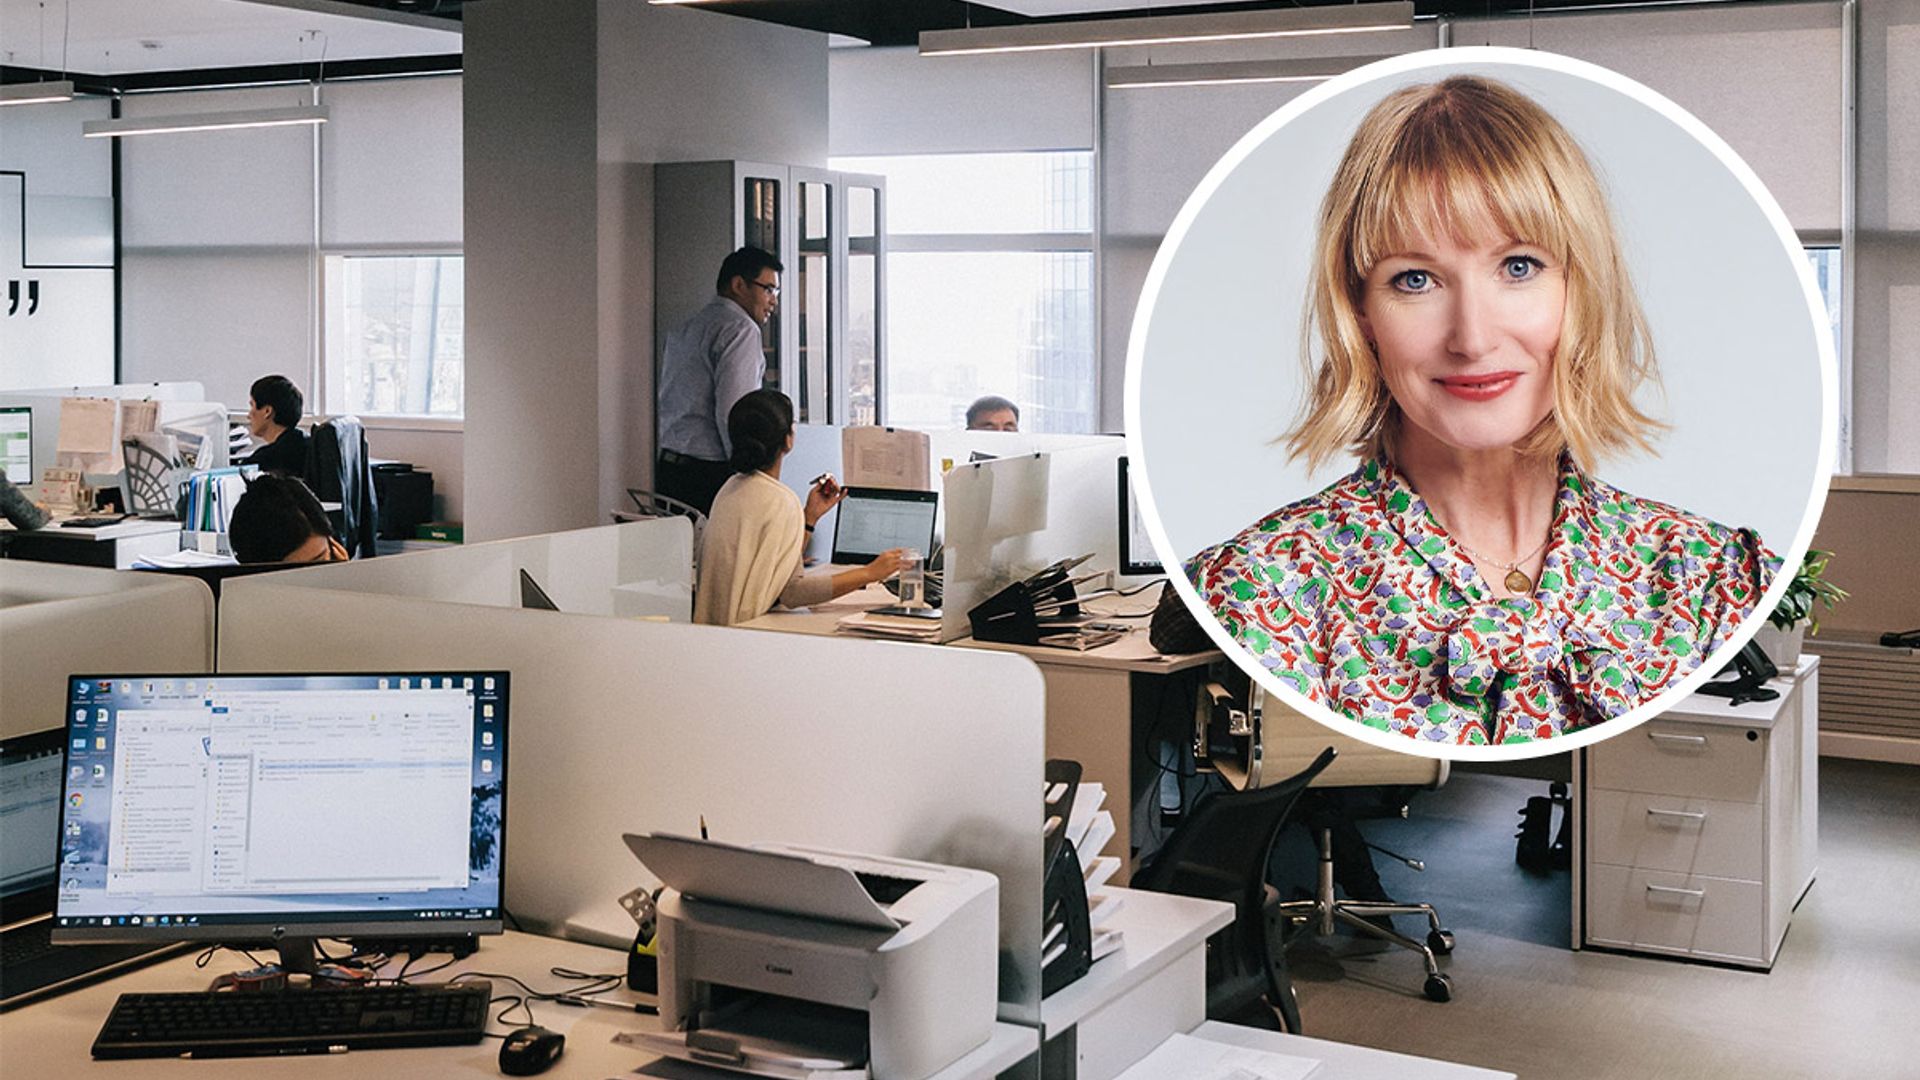 Menopause in the workplace: HFM's Editor shares her tried and tested advice